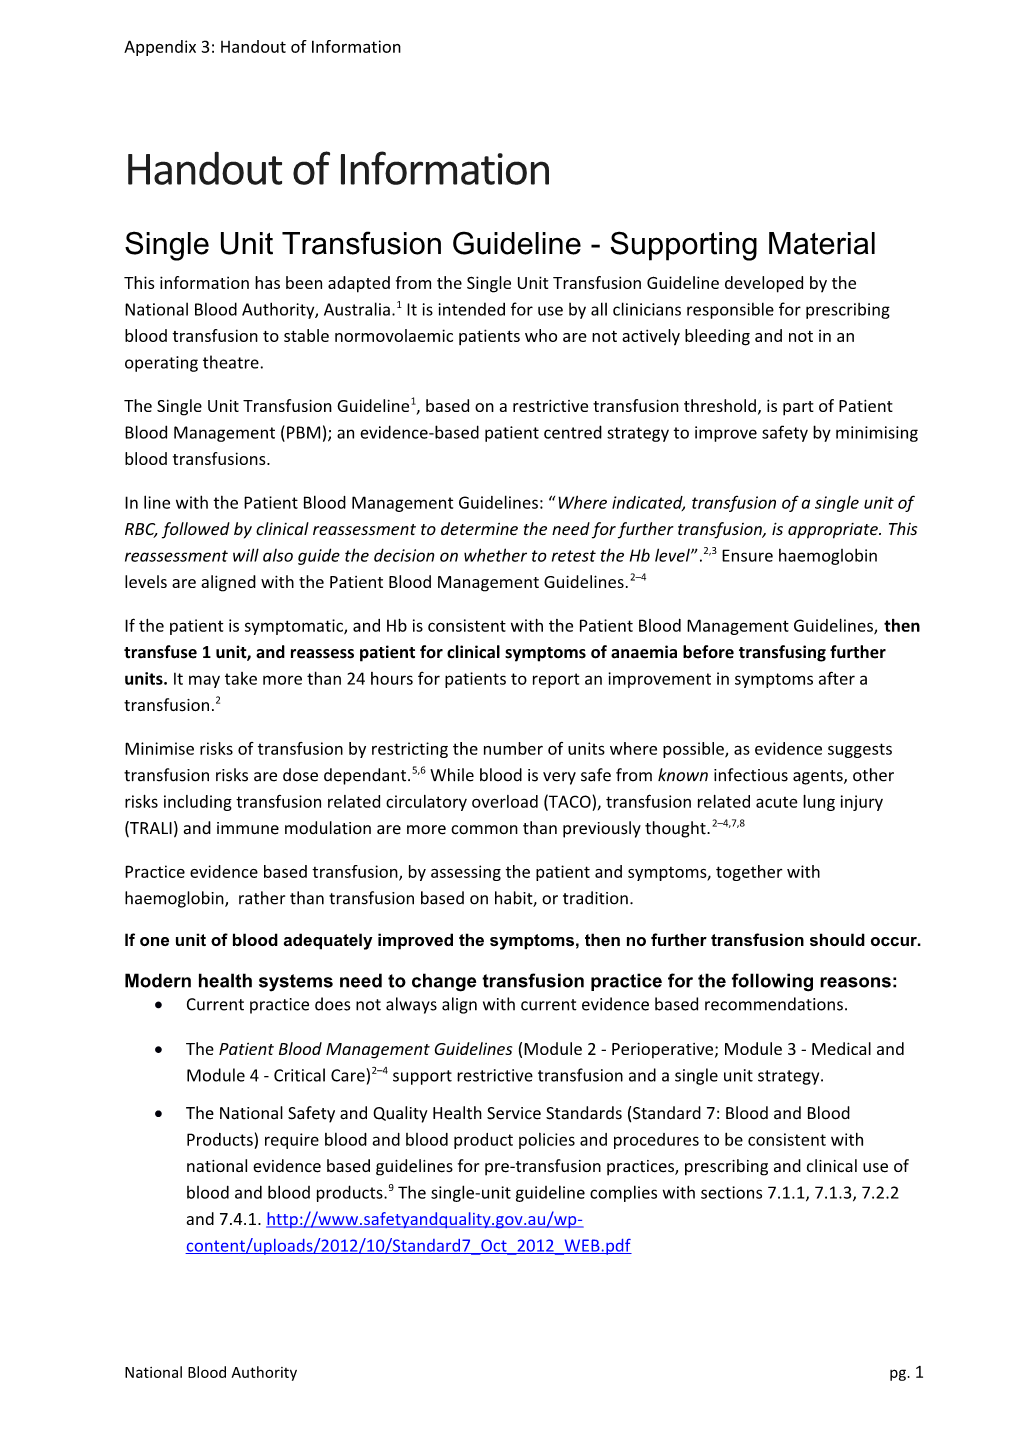 Single Unit Transfusion Guideline -Supporting Material